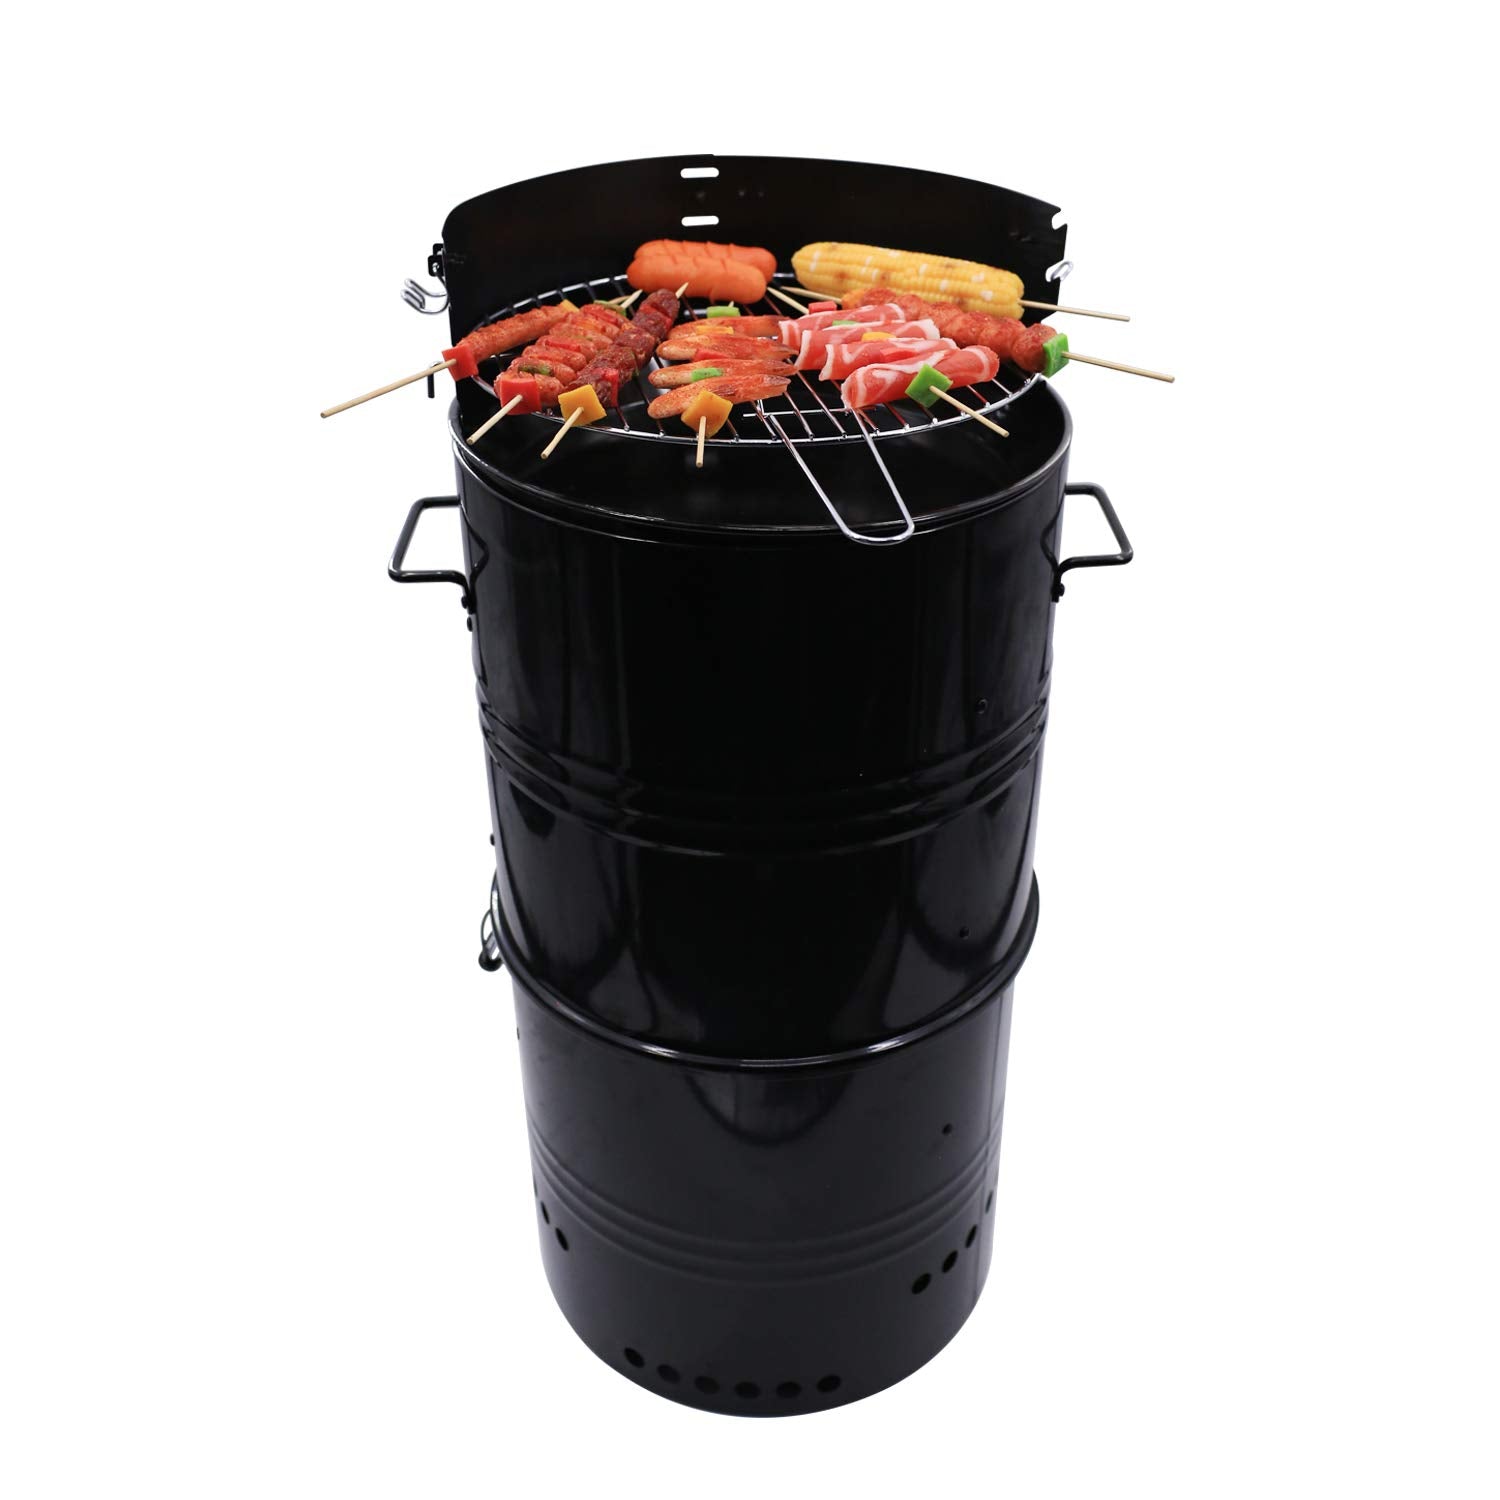 Hakka 16-Inch Multi-Function Barbecue and Charcoal Smoker Grill